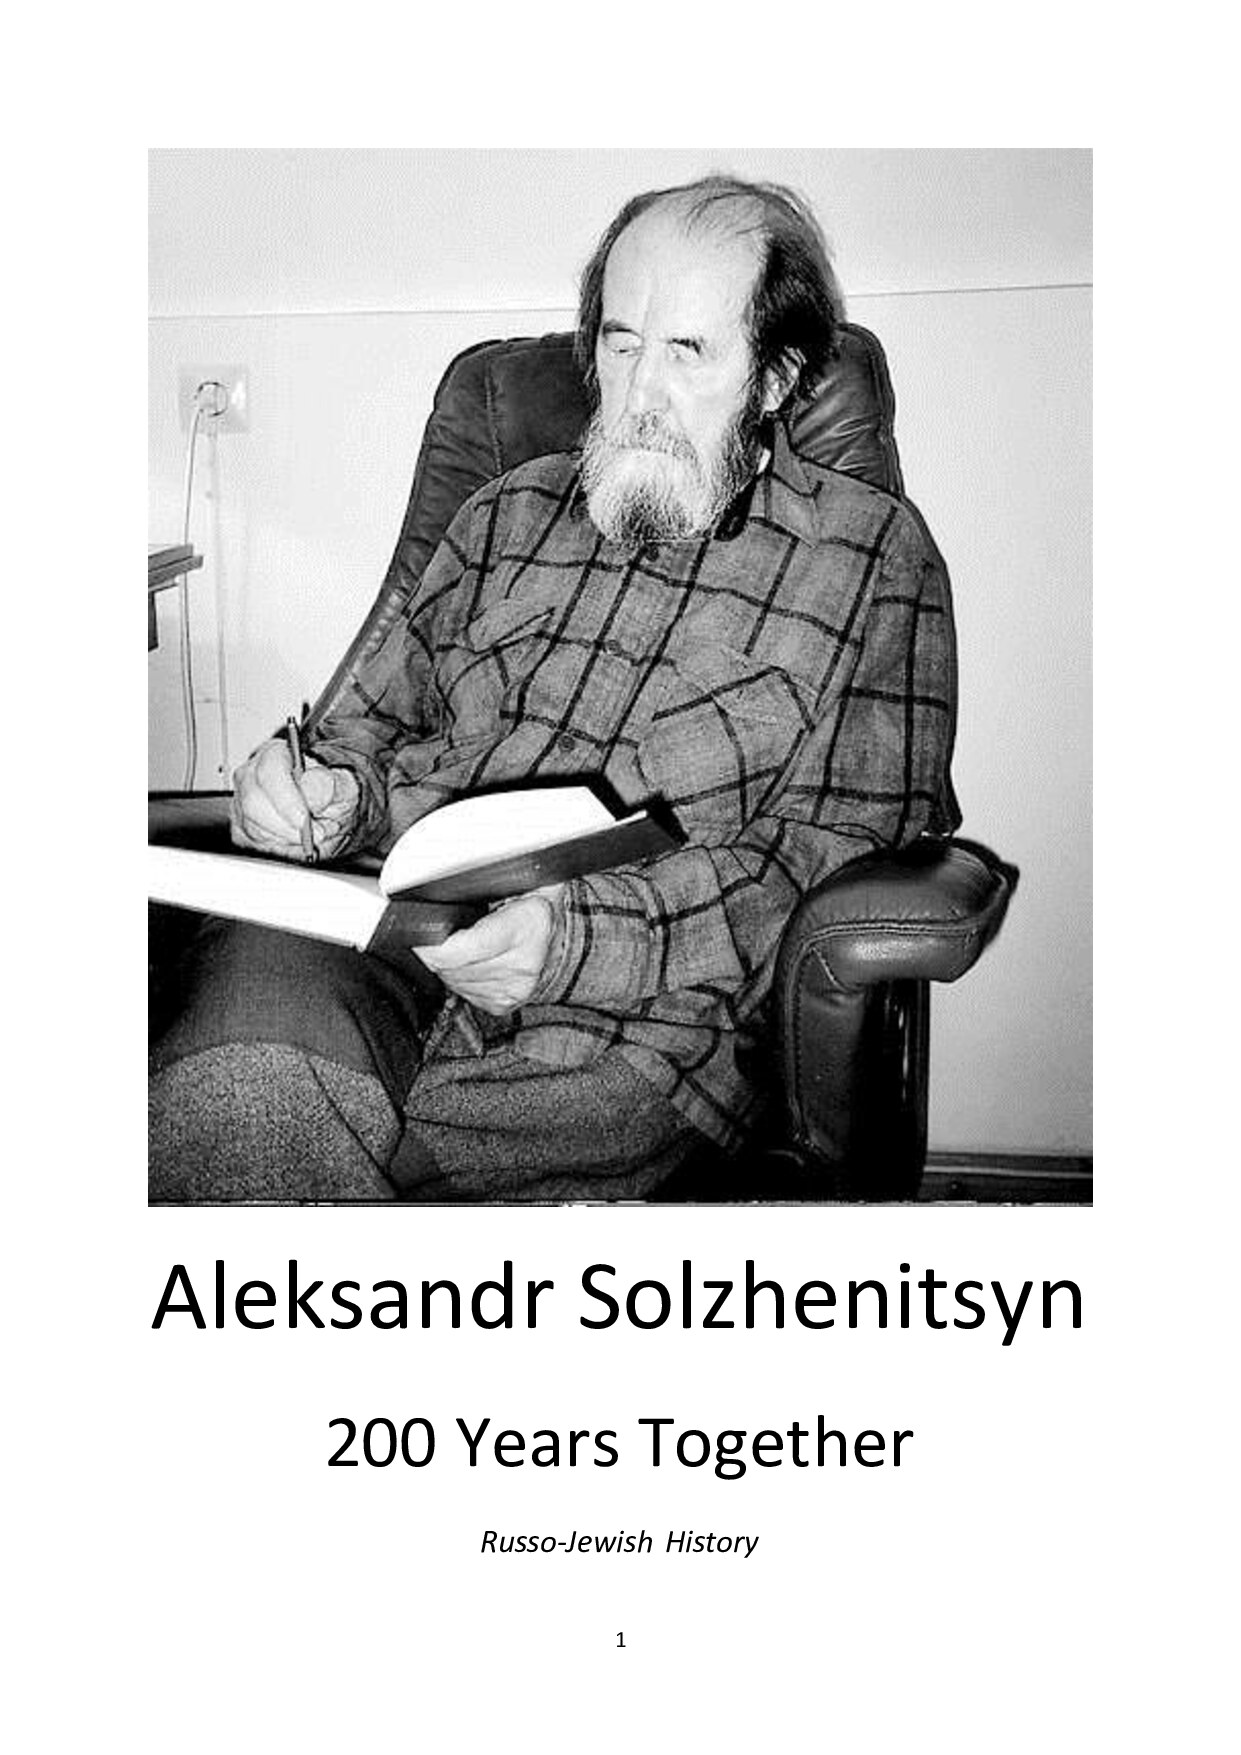 Solzhenitsyn - Two Hundred Years Together (incomplete)